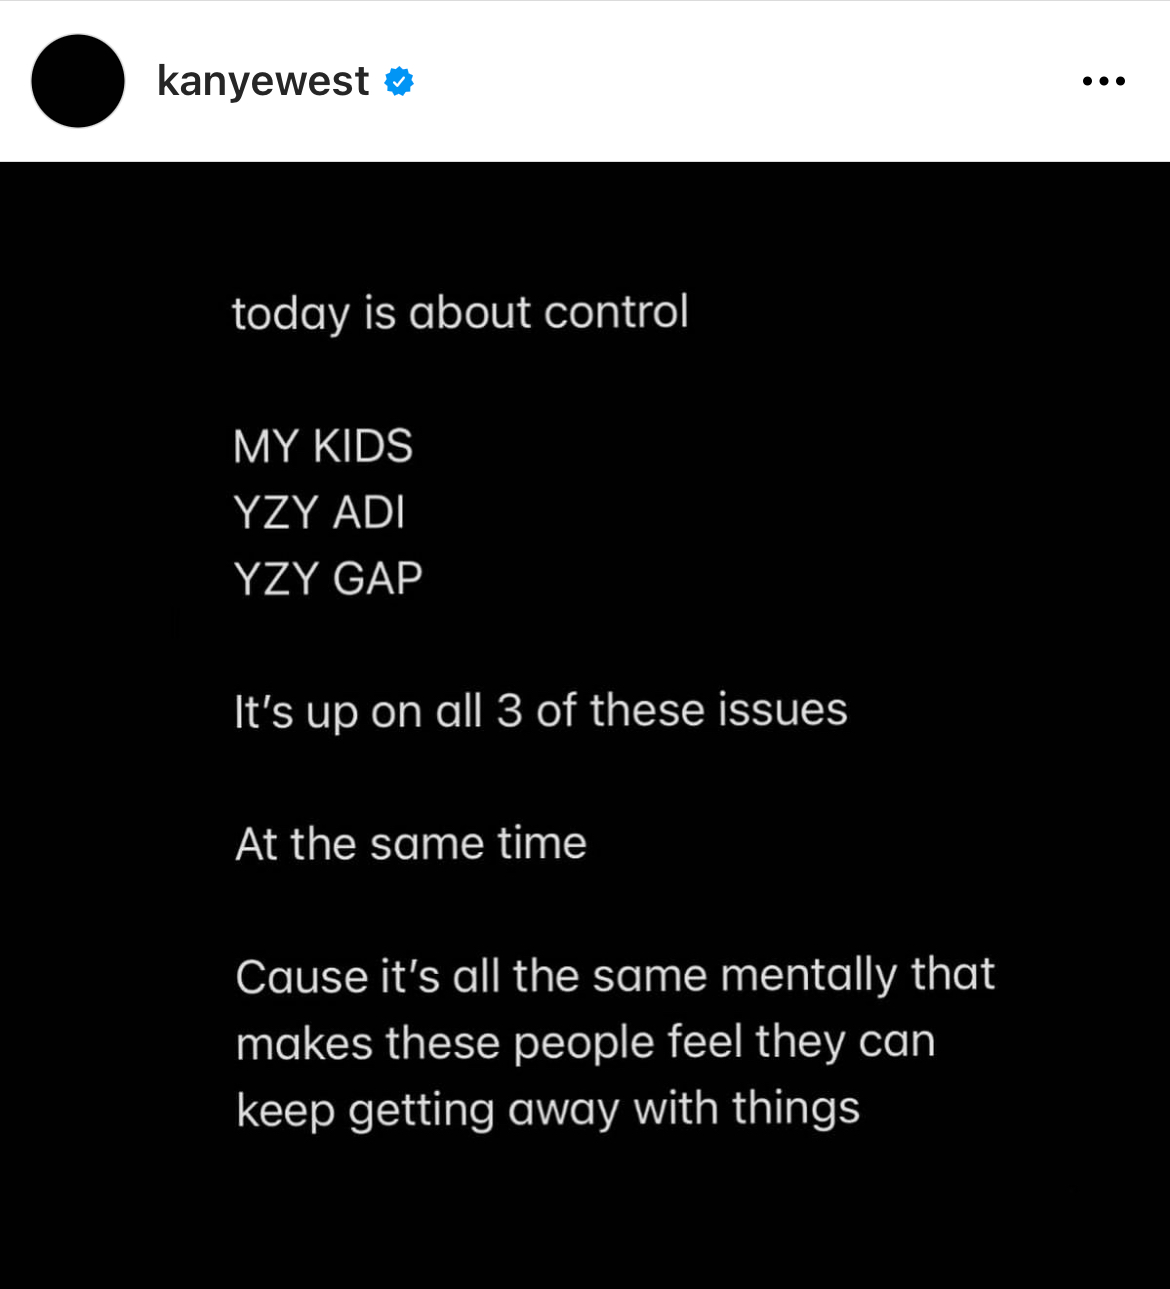 Kanye West Instagram Meltdown - screenshot - kanyewest today is about control My Kids Yzy Adi Yzy Gap It's up on all 3 of these issues At the same time Cause it's all the same mentally that makes these people feel they can keep getting away with things